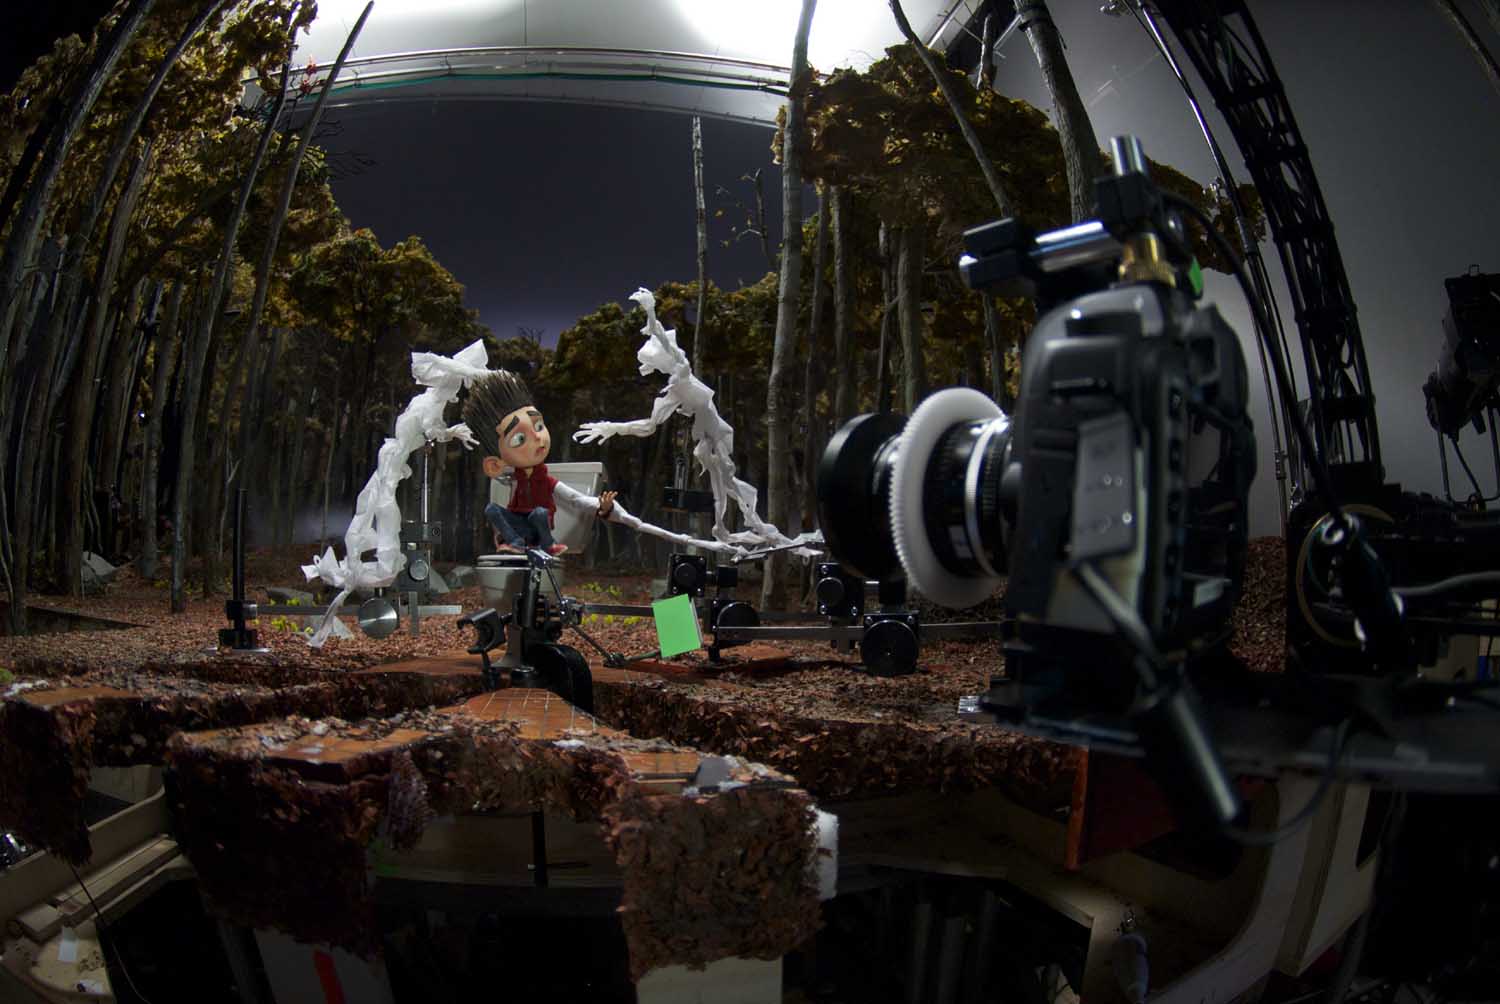 Canon 5D Mark II Cameras Capture 3D Stop Motion for ParaNorman - Below